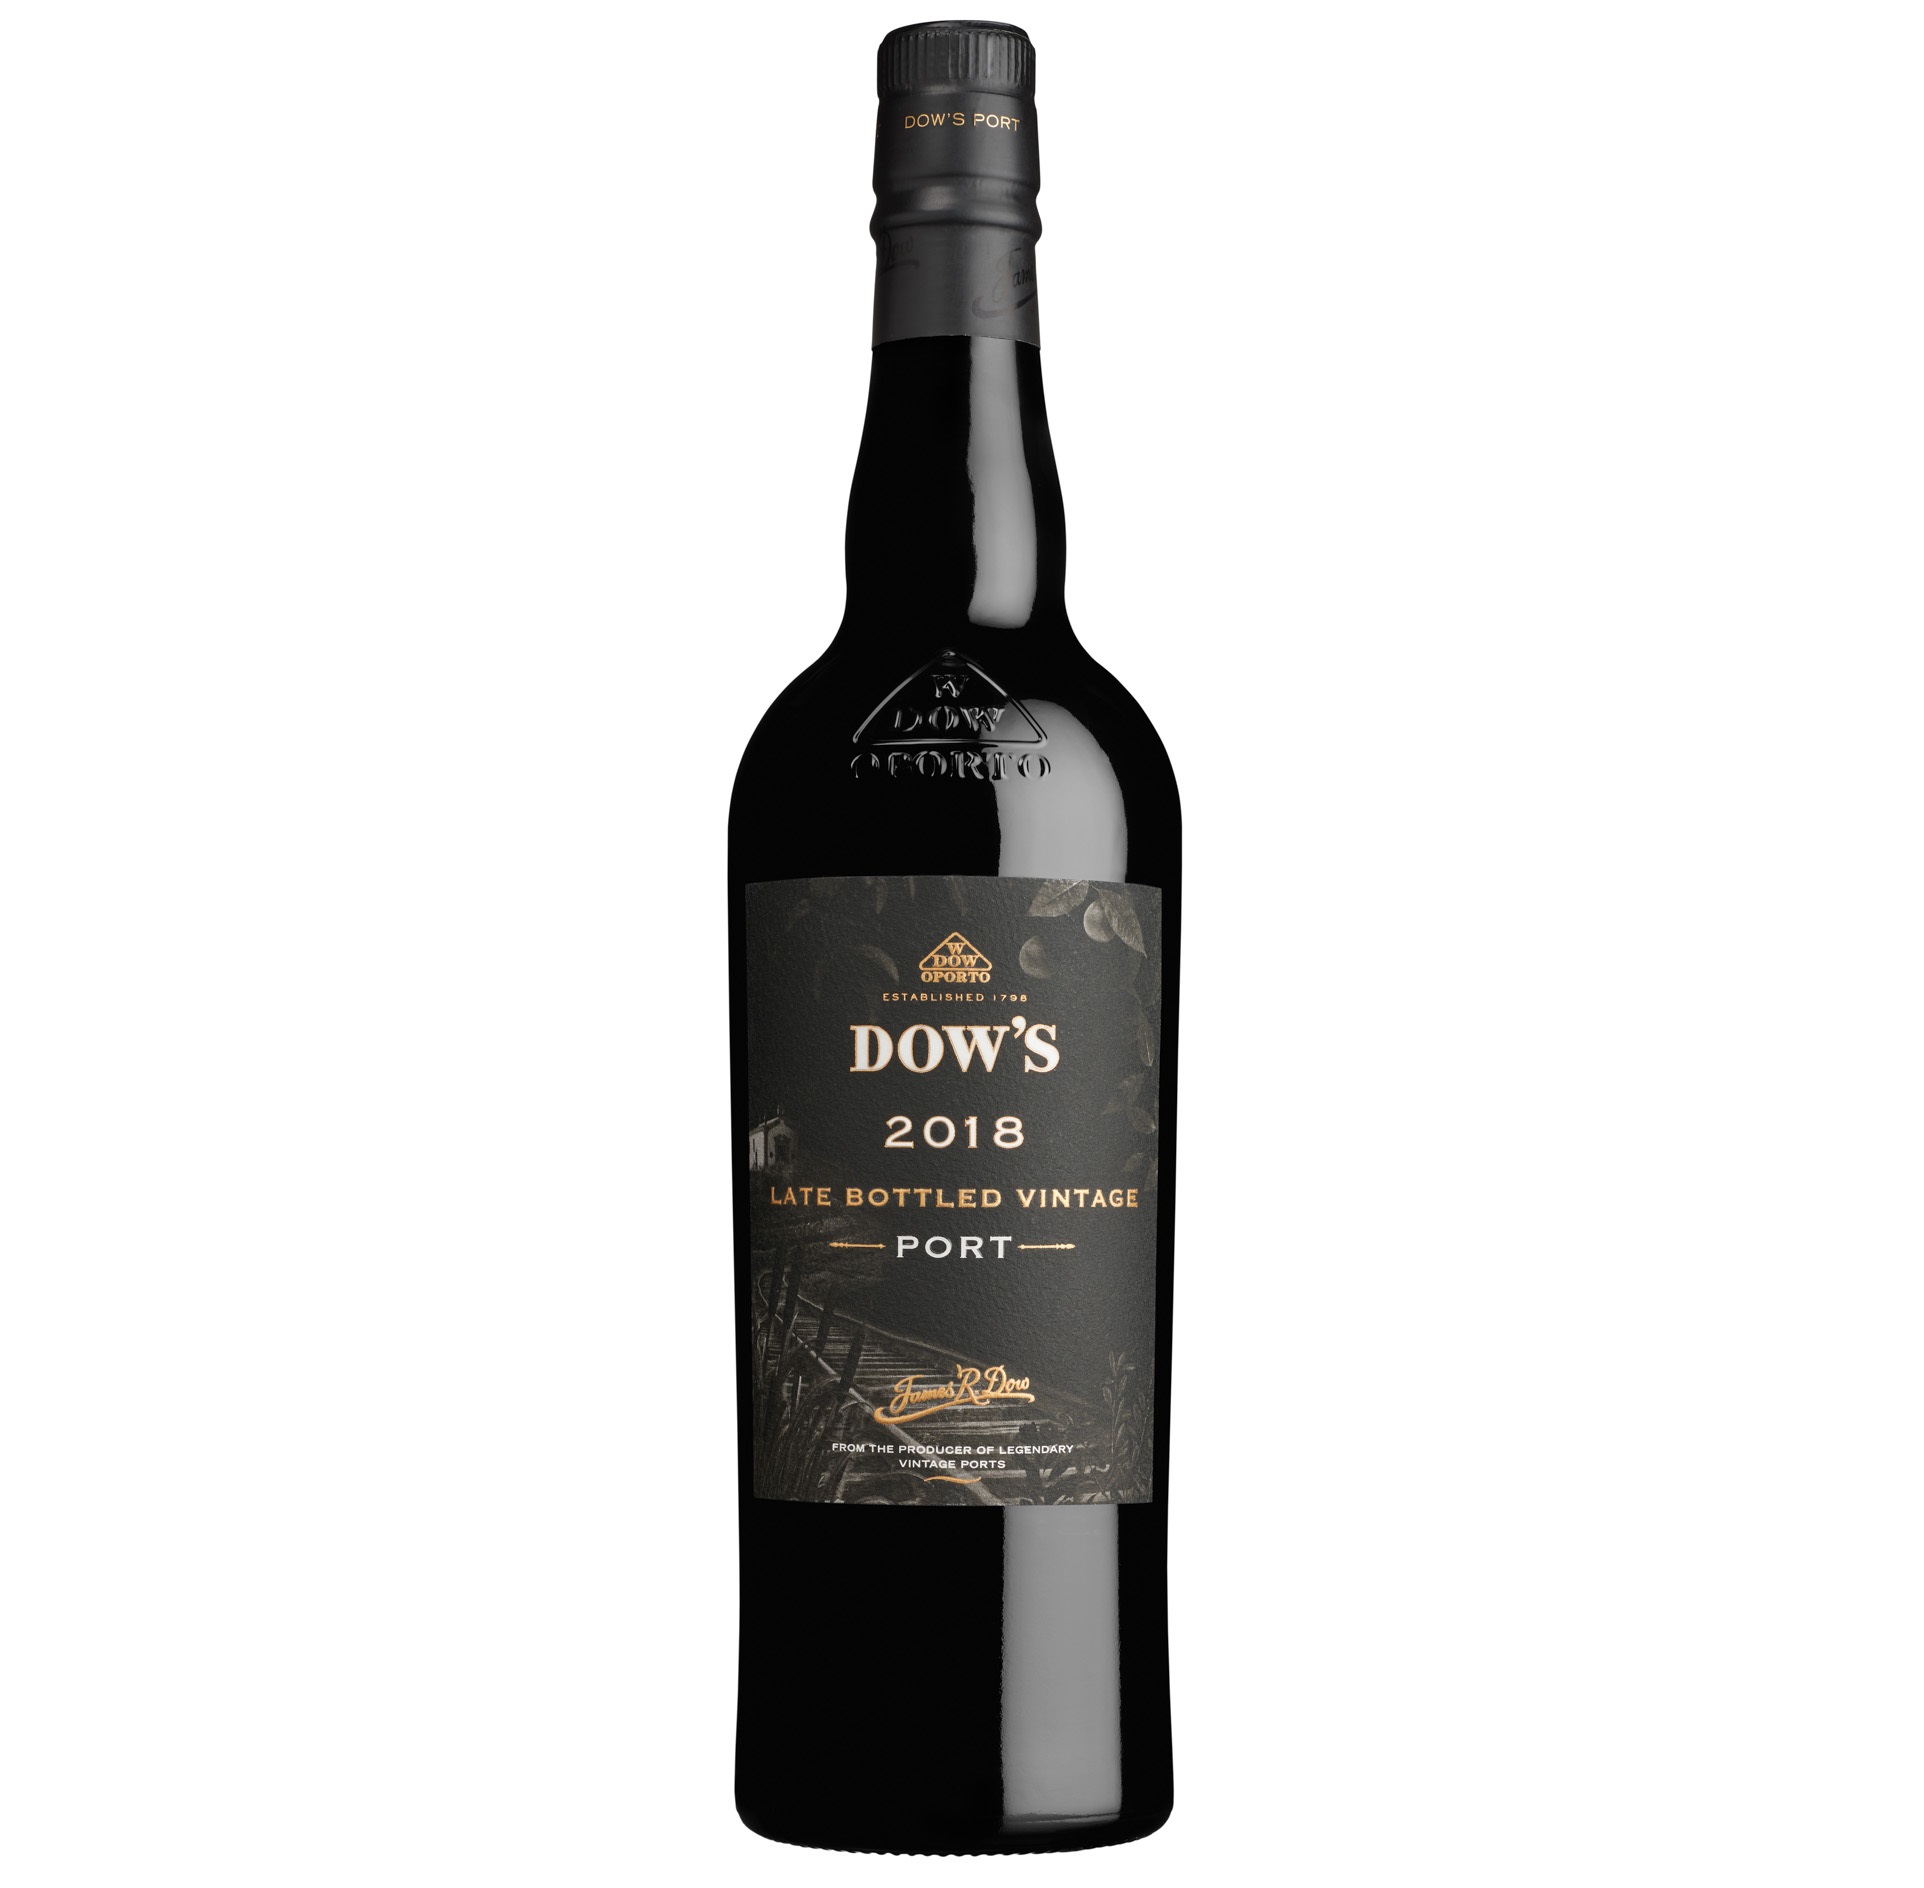 Dow's Late Bottled Vintage 2018 (22,67€ / Litro)